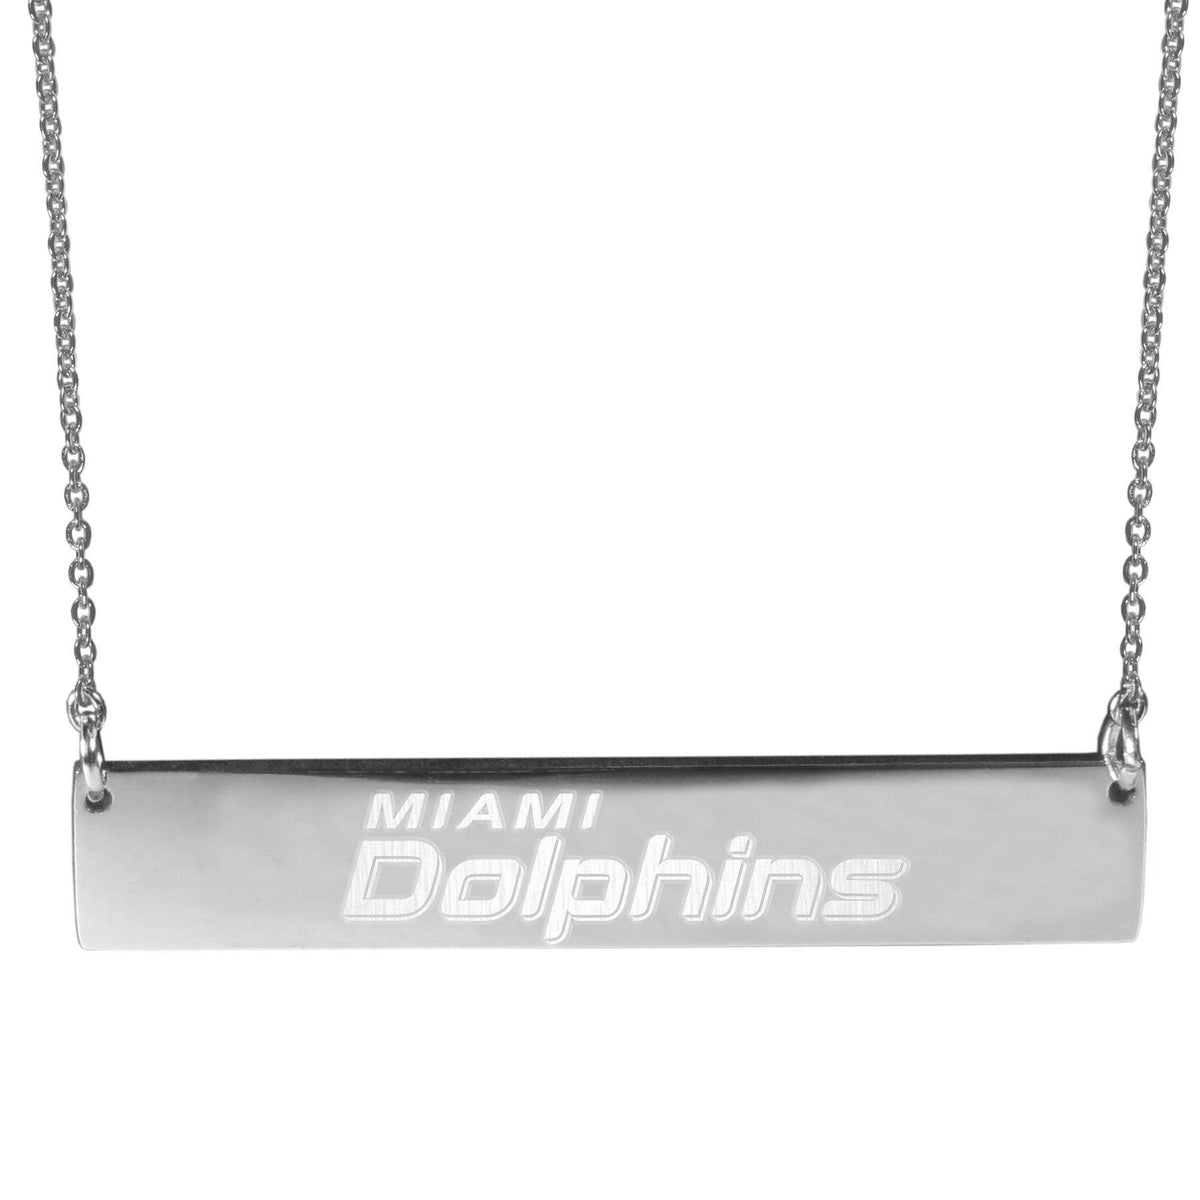 Miami Dolphins Bar Necklace - Flyclothing LLC